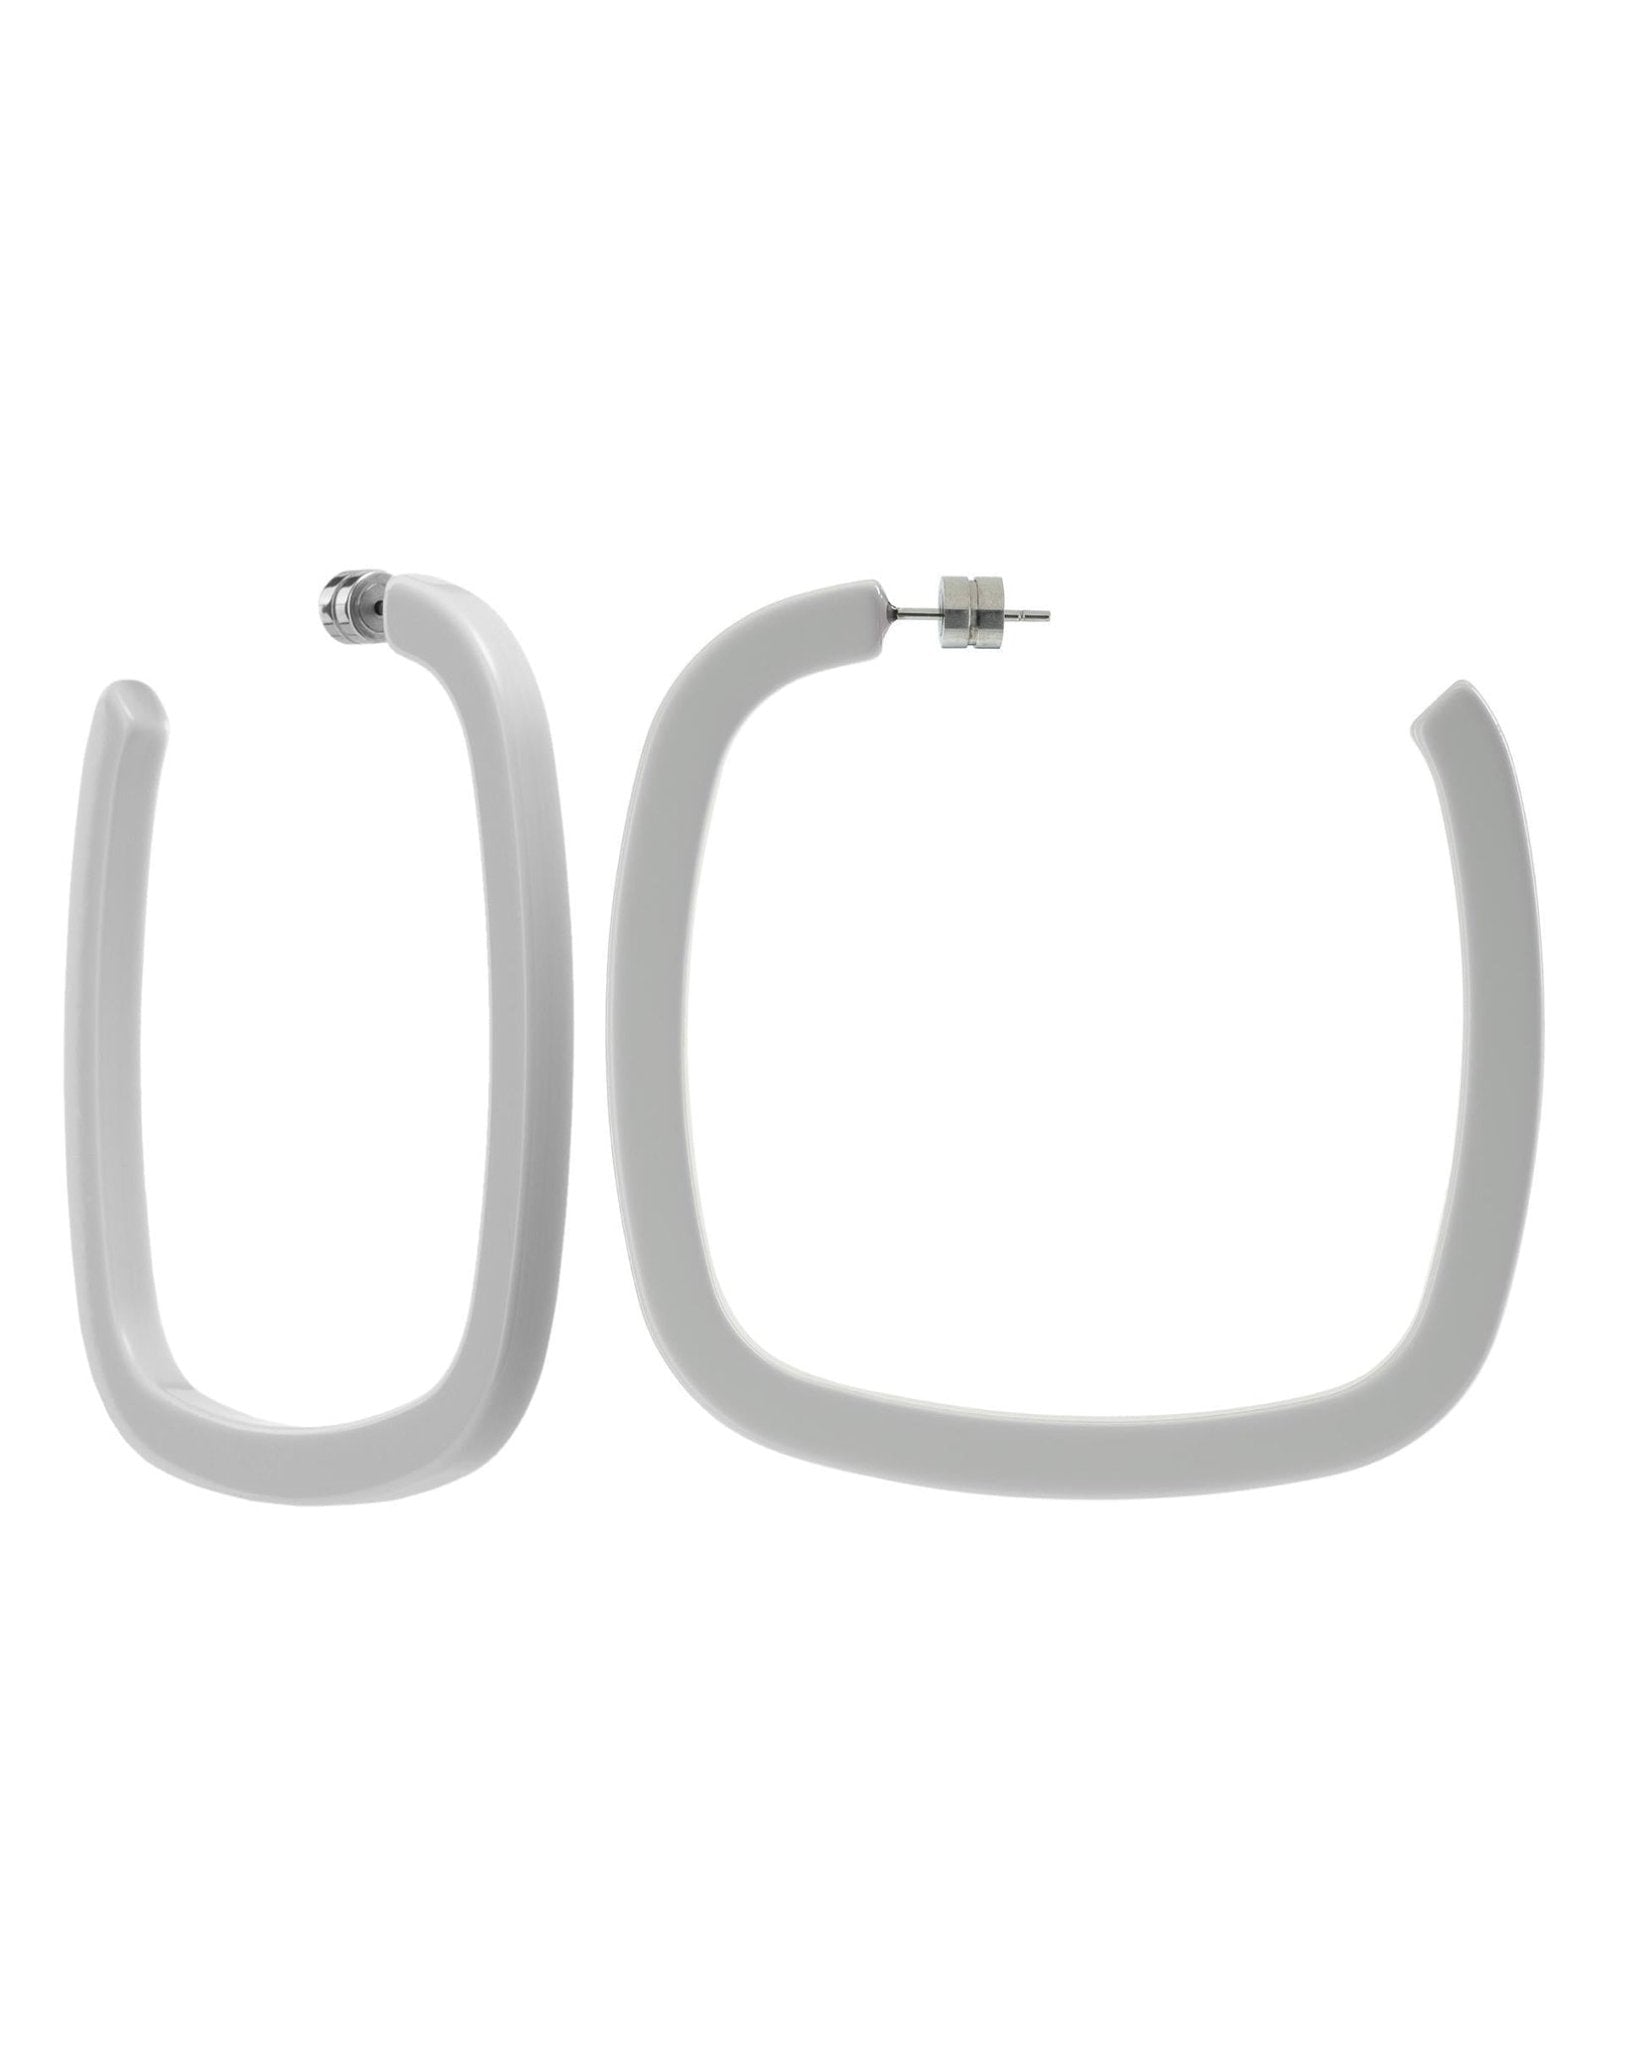 Large Square Hoops in Light Grey - MACHETE